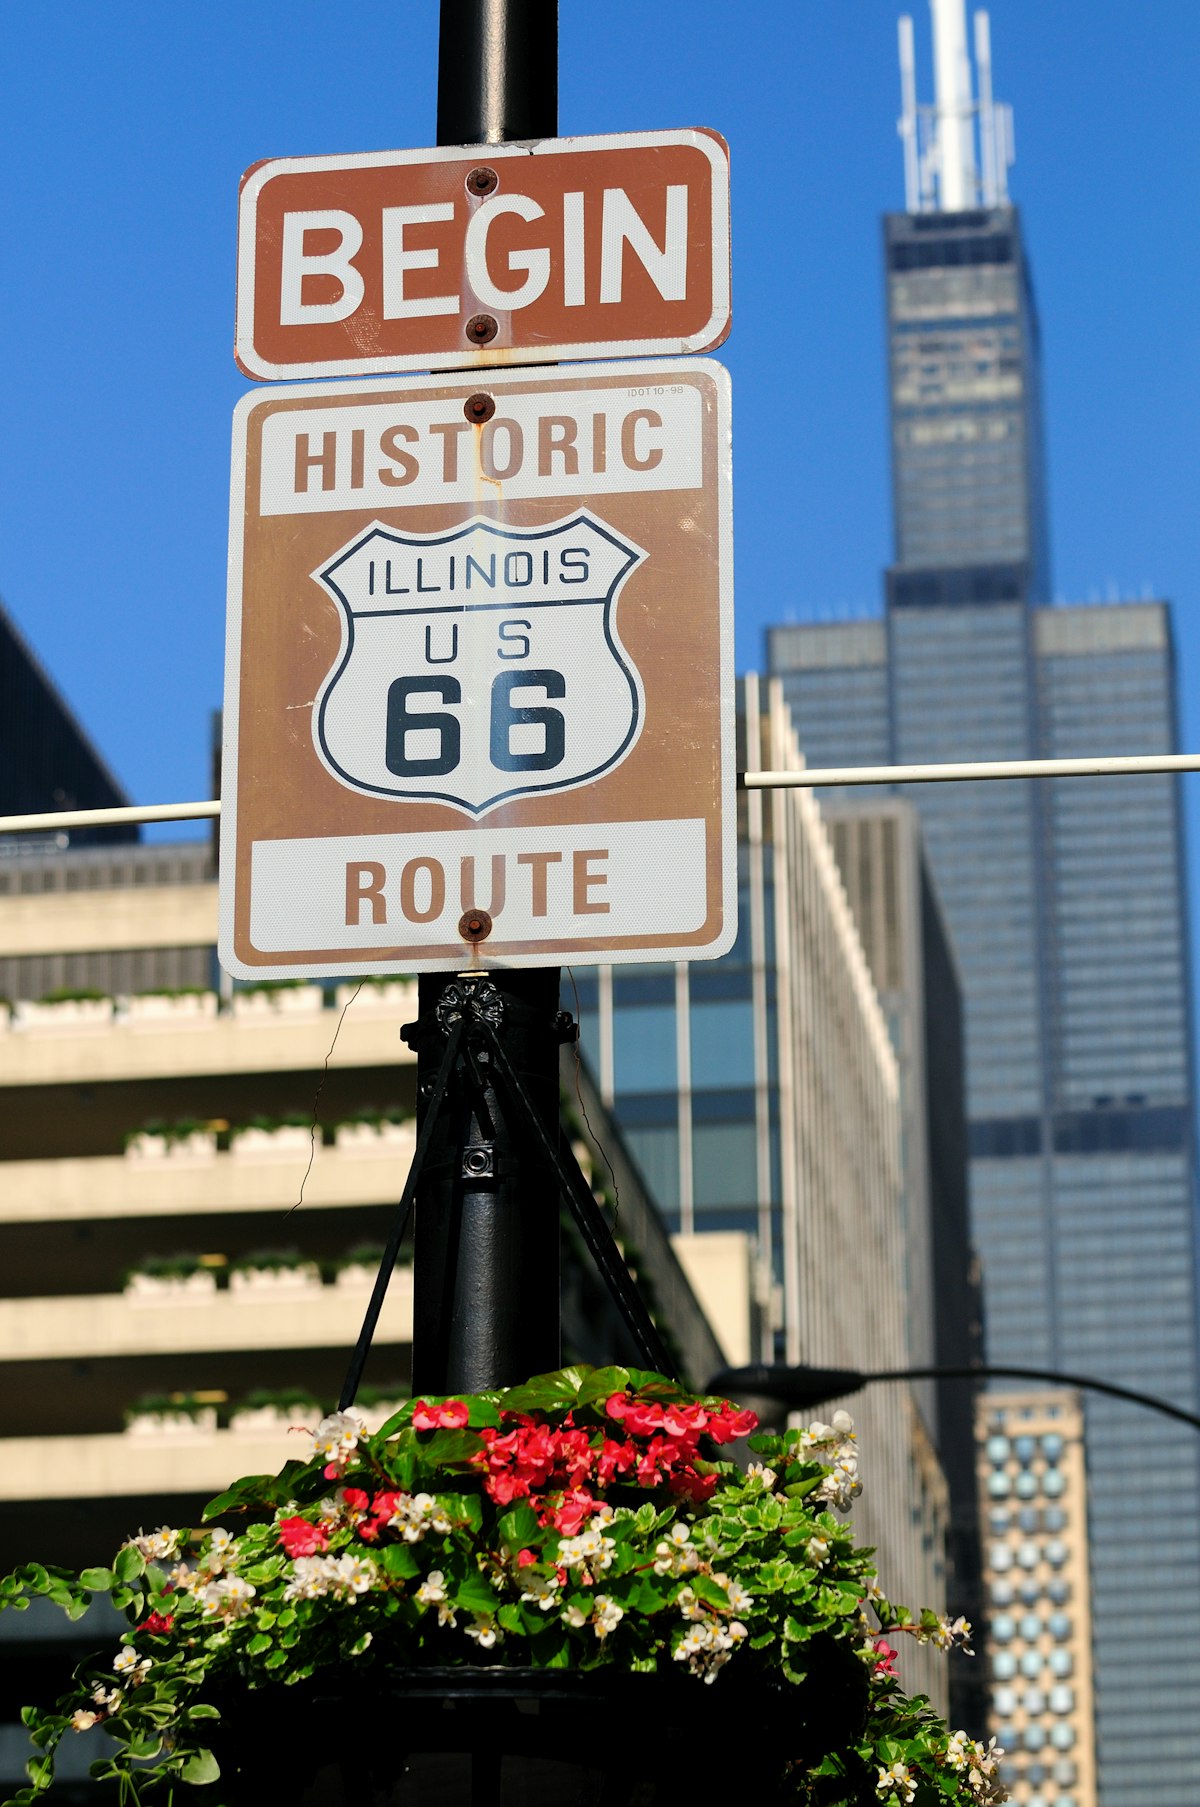 Street signs commemorating the start of the famous U.S. Route 66, Chicago, Illinois, USA